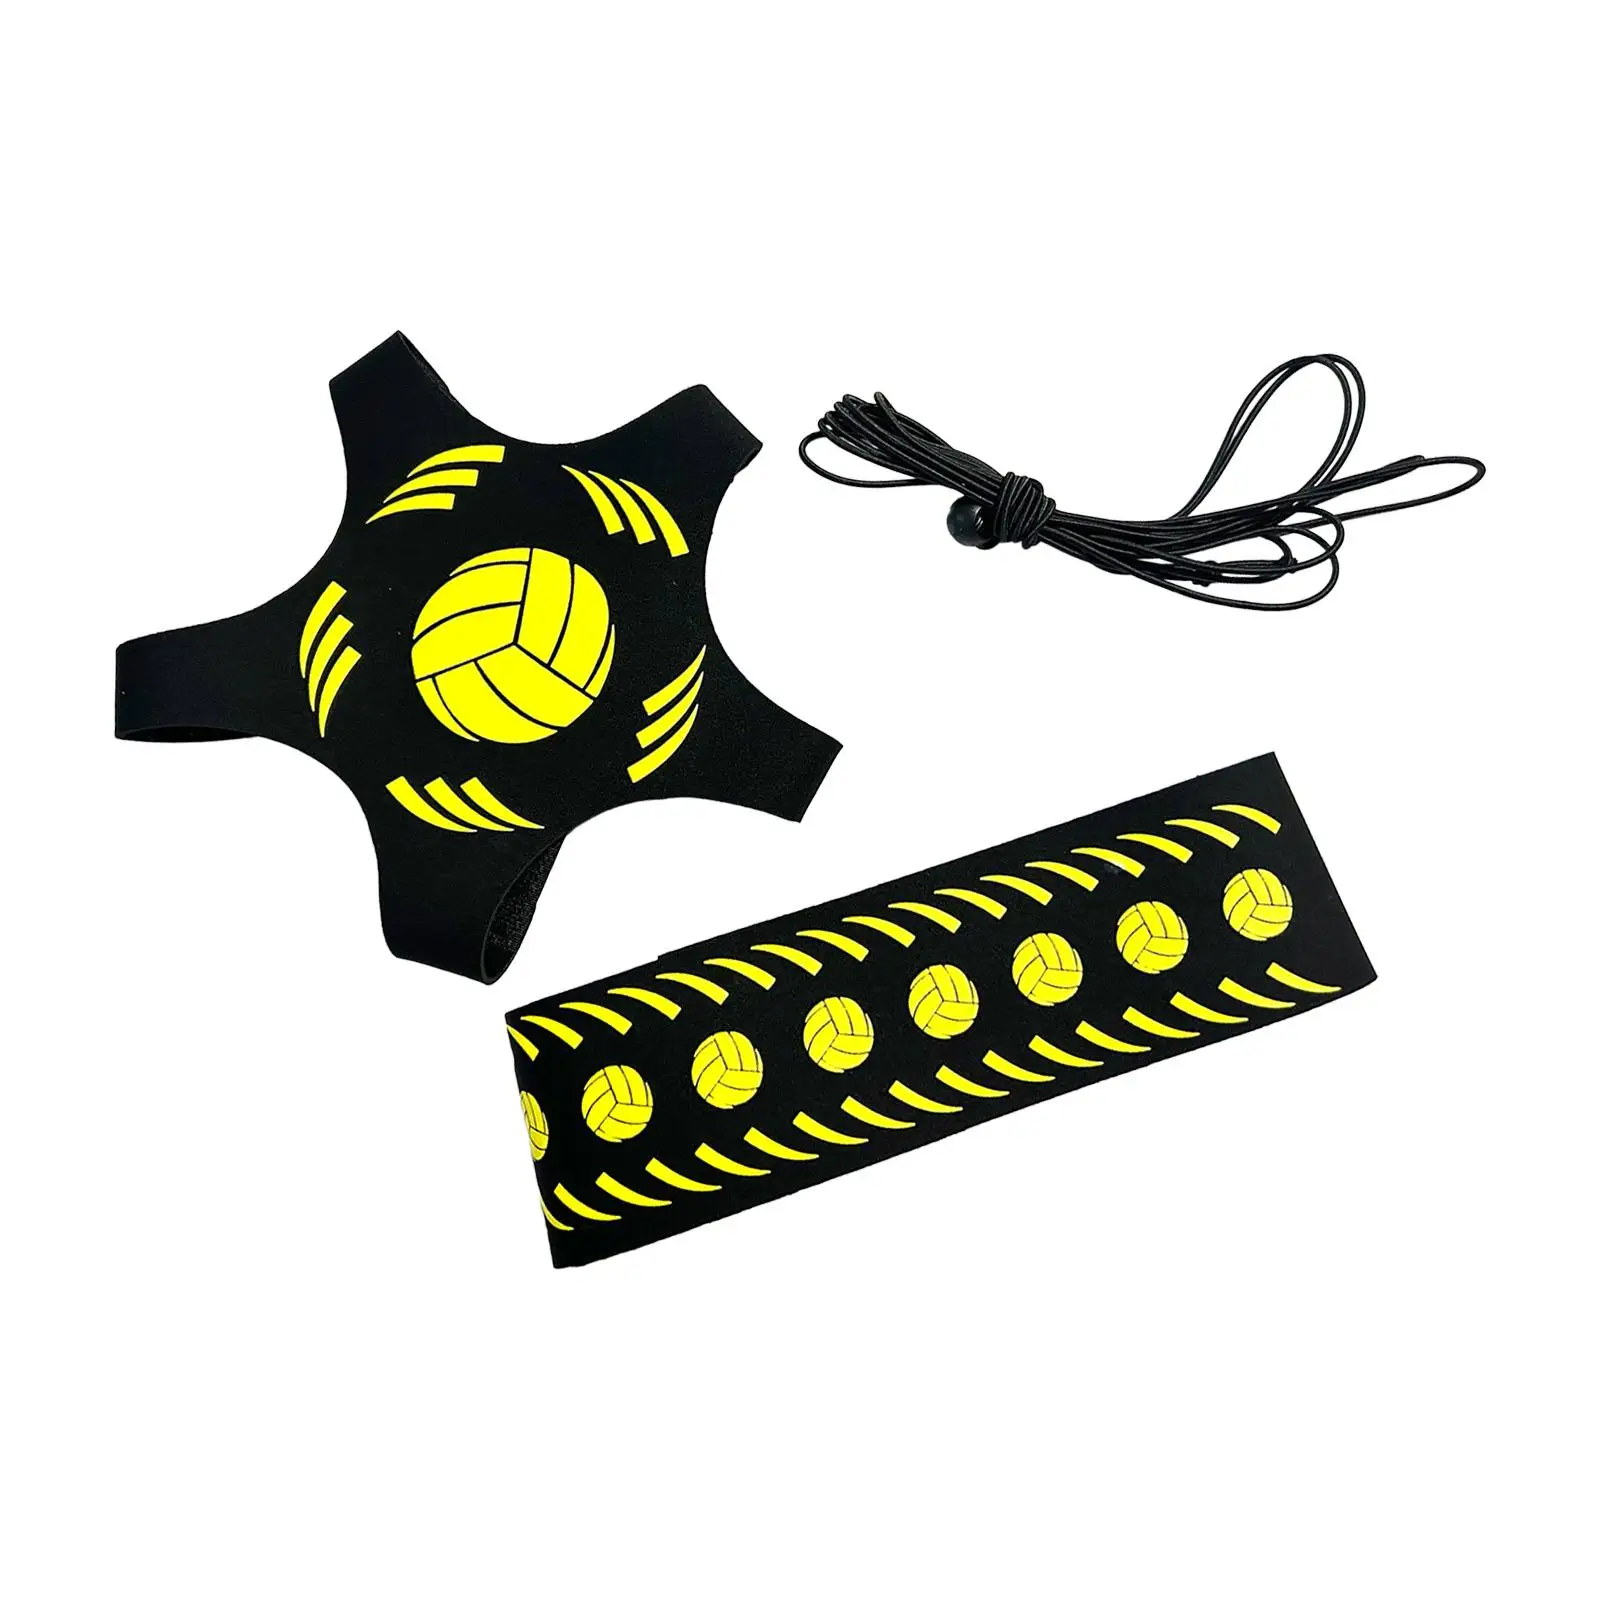 Volleyball Training Equipment - Improve Your Skills with This Adjustable Waist